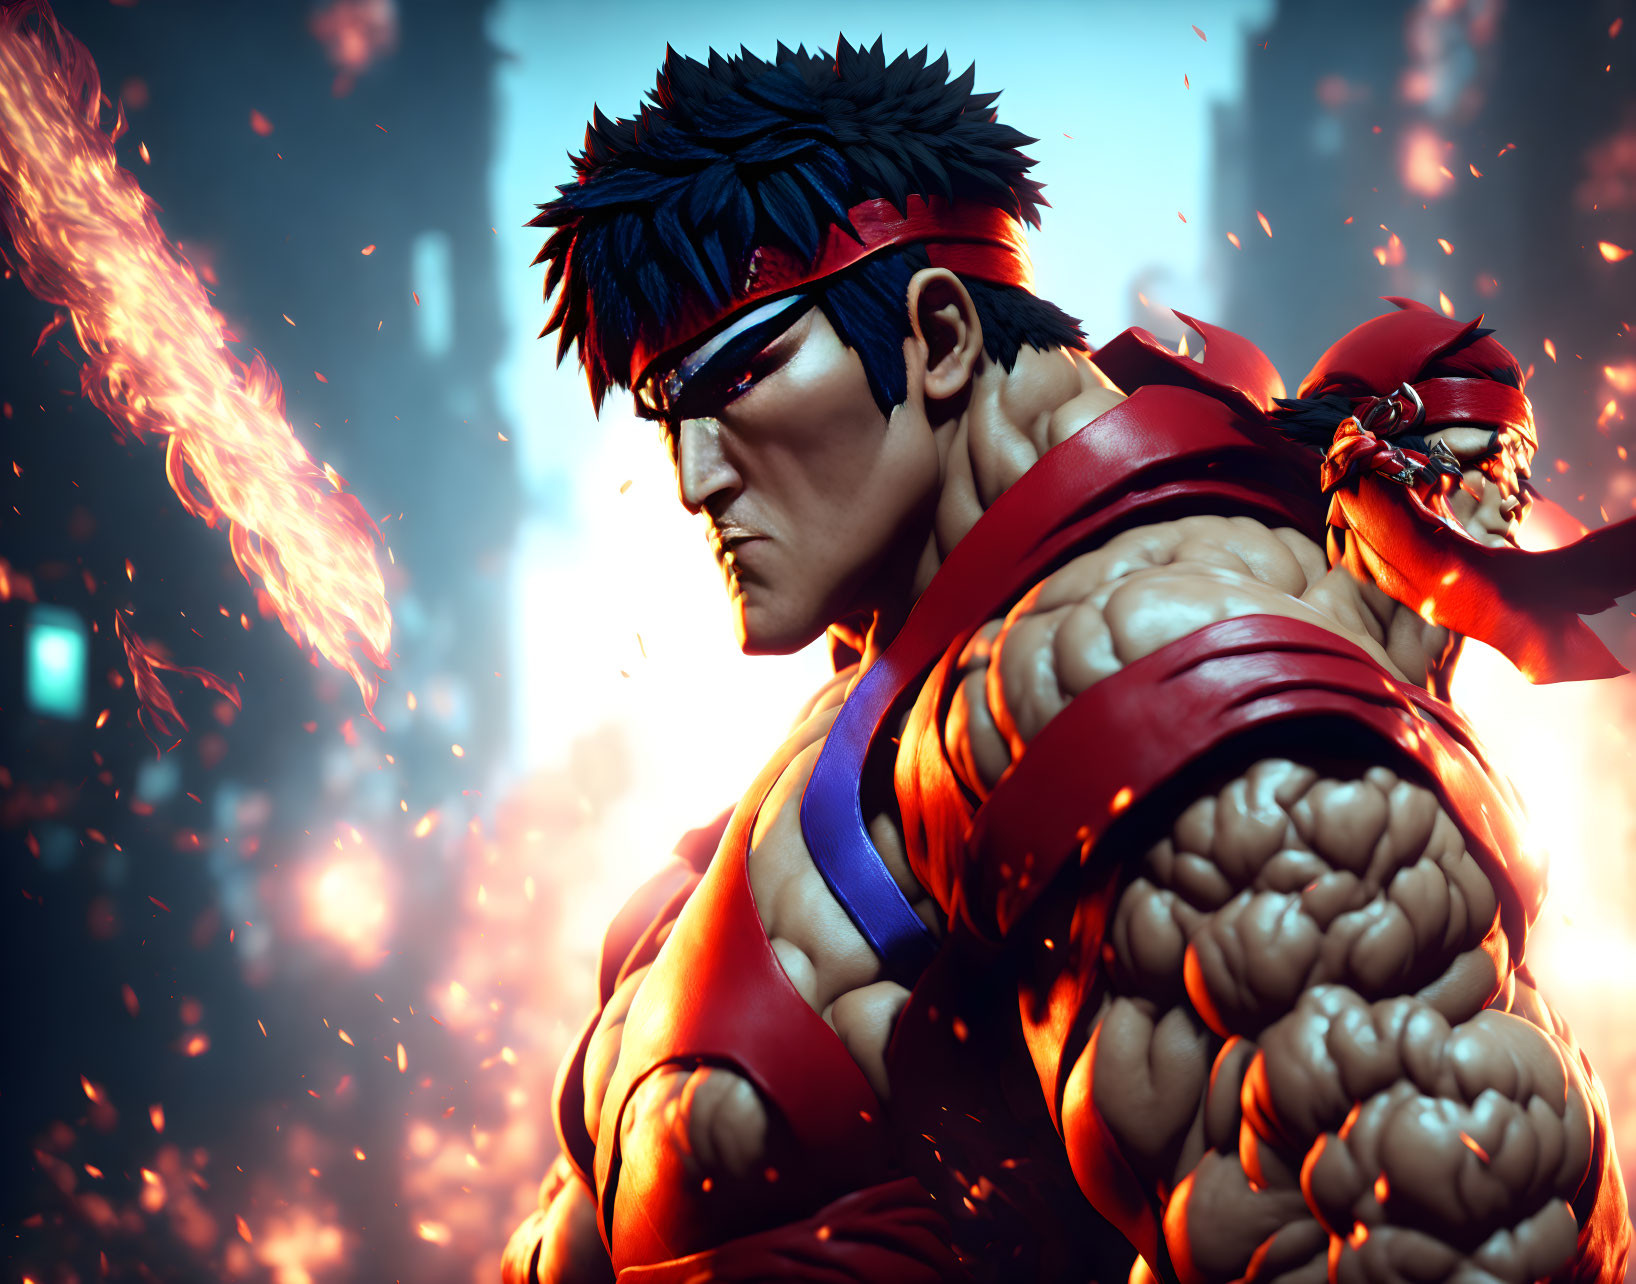 Dynamic combat scene: animated martial artists in fiery aura with energy attack.